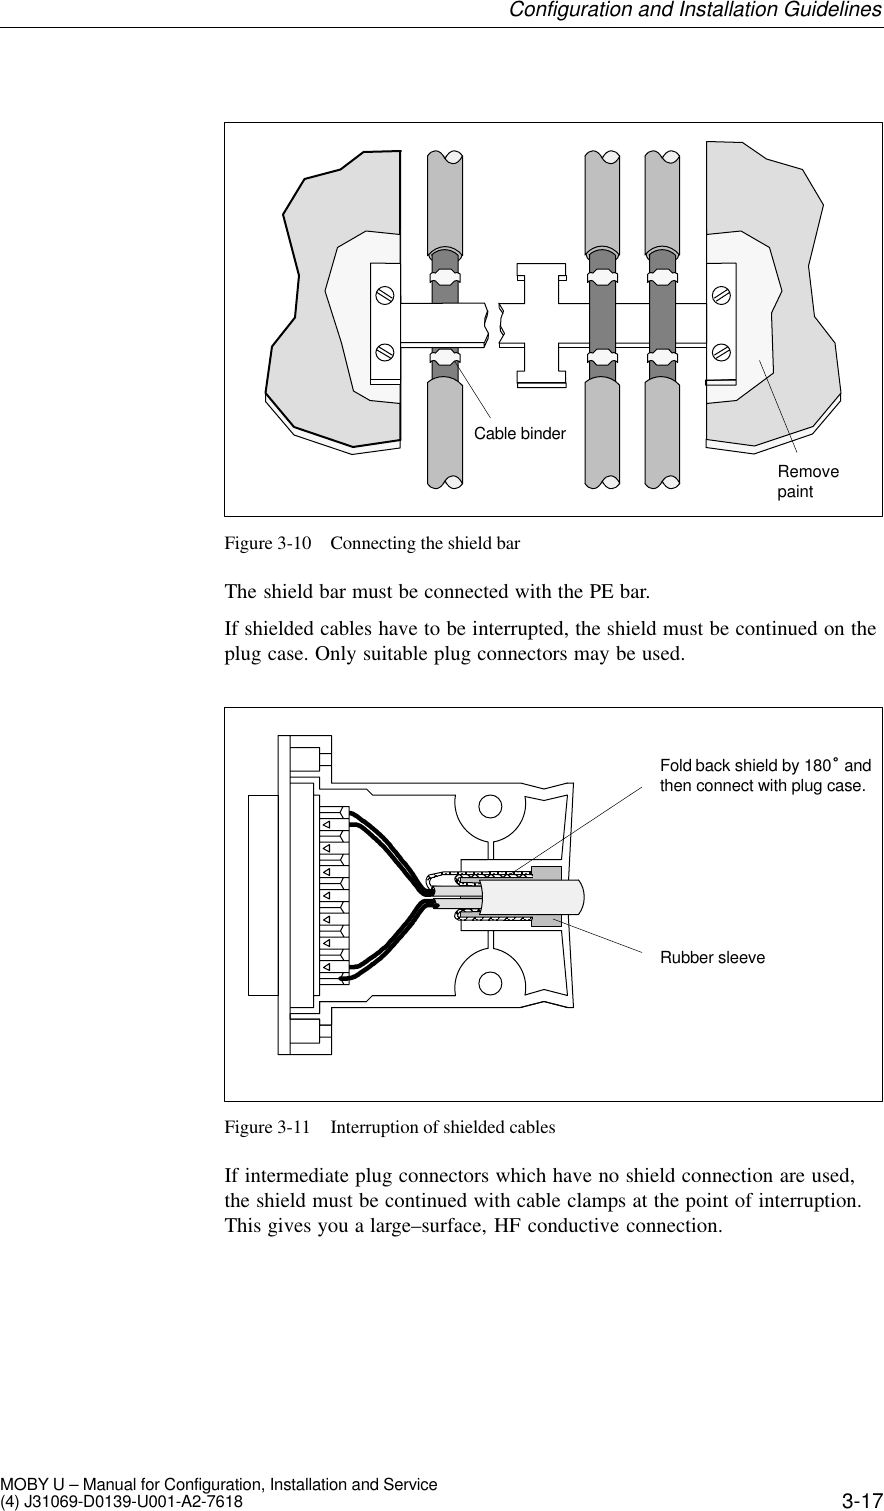 3-17MOBY U – Manual for Configuration, Installation and Service(4) J31069-D0139-U001-A2-7618RemovepaintCable binderFigure 3-10 Connecting the shield barThe shield bar must be connected with the PE bar.If shielded cables have to be interrupted, the shield must be continued on theplug case. Only suitable plug connectors may be used.Fold back shield by 180° andthen connect with plug case.Rubber sleeveFigure 3-11 Interruption of shielded cablesIf intermediate plug connectors which have no shield connection are used,the shield must be continued with cable clamps at the point of interruption.This gives you a large–surface, HF conductive connection.Configuration and Installation Guidelines